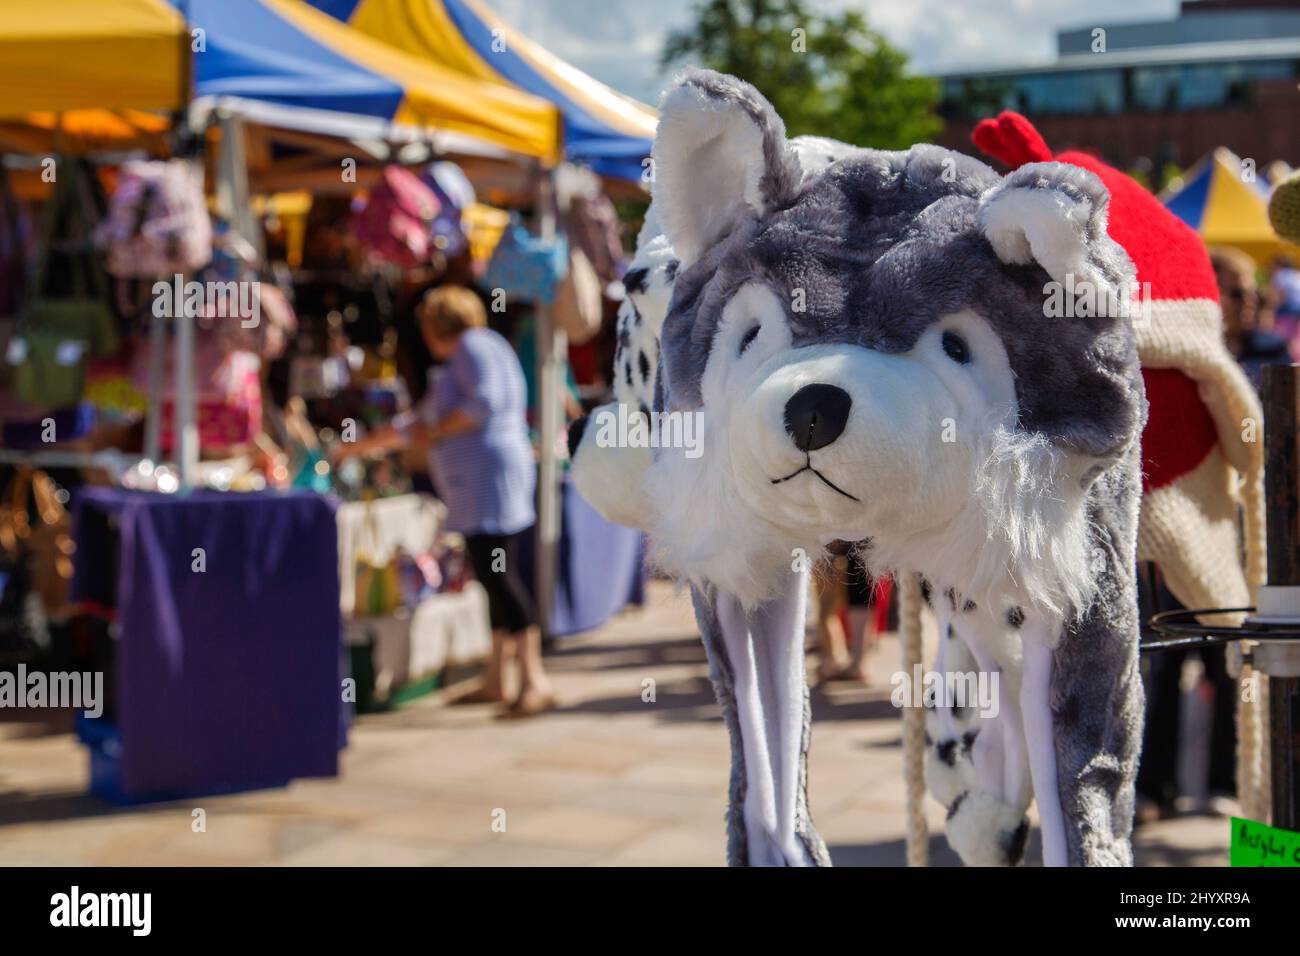 A shopper looks at goods at a typical Sunday market in England. In the foreground an animal inspired novelty hat looks on. Stock Photo